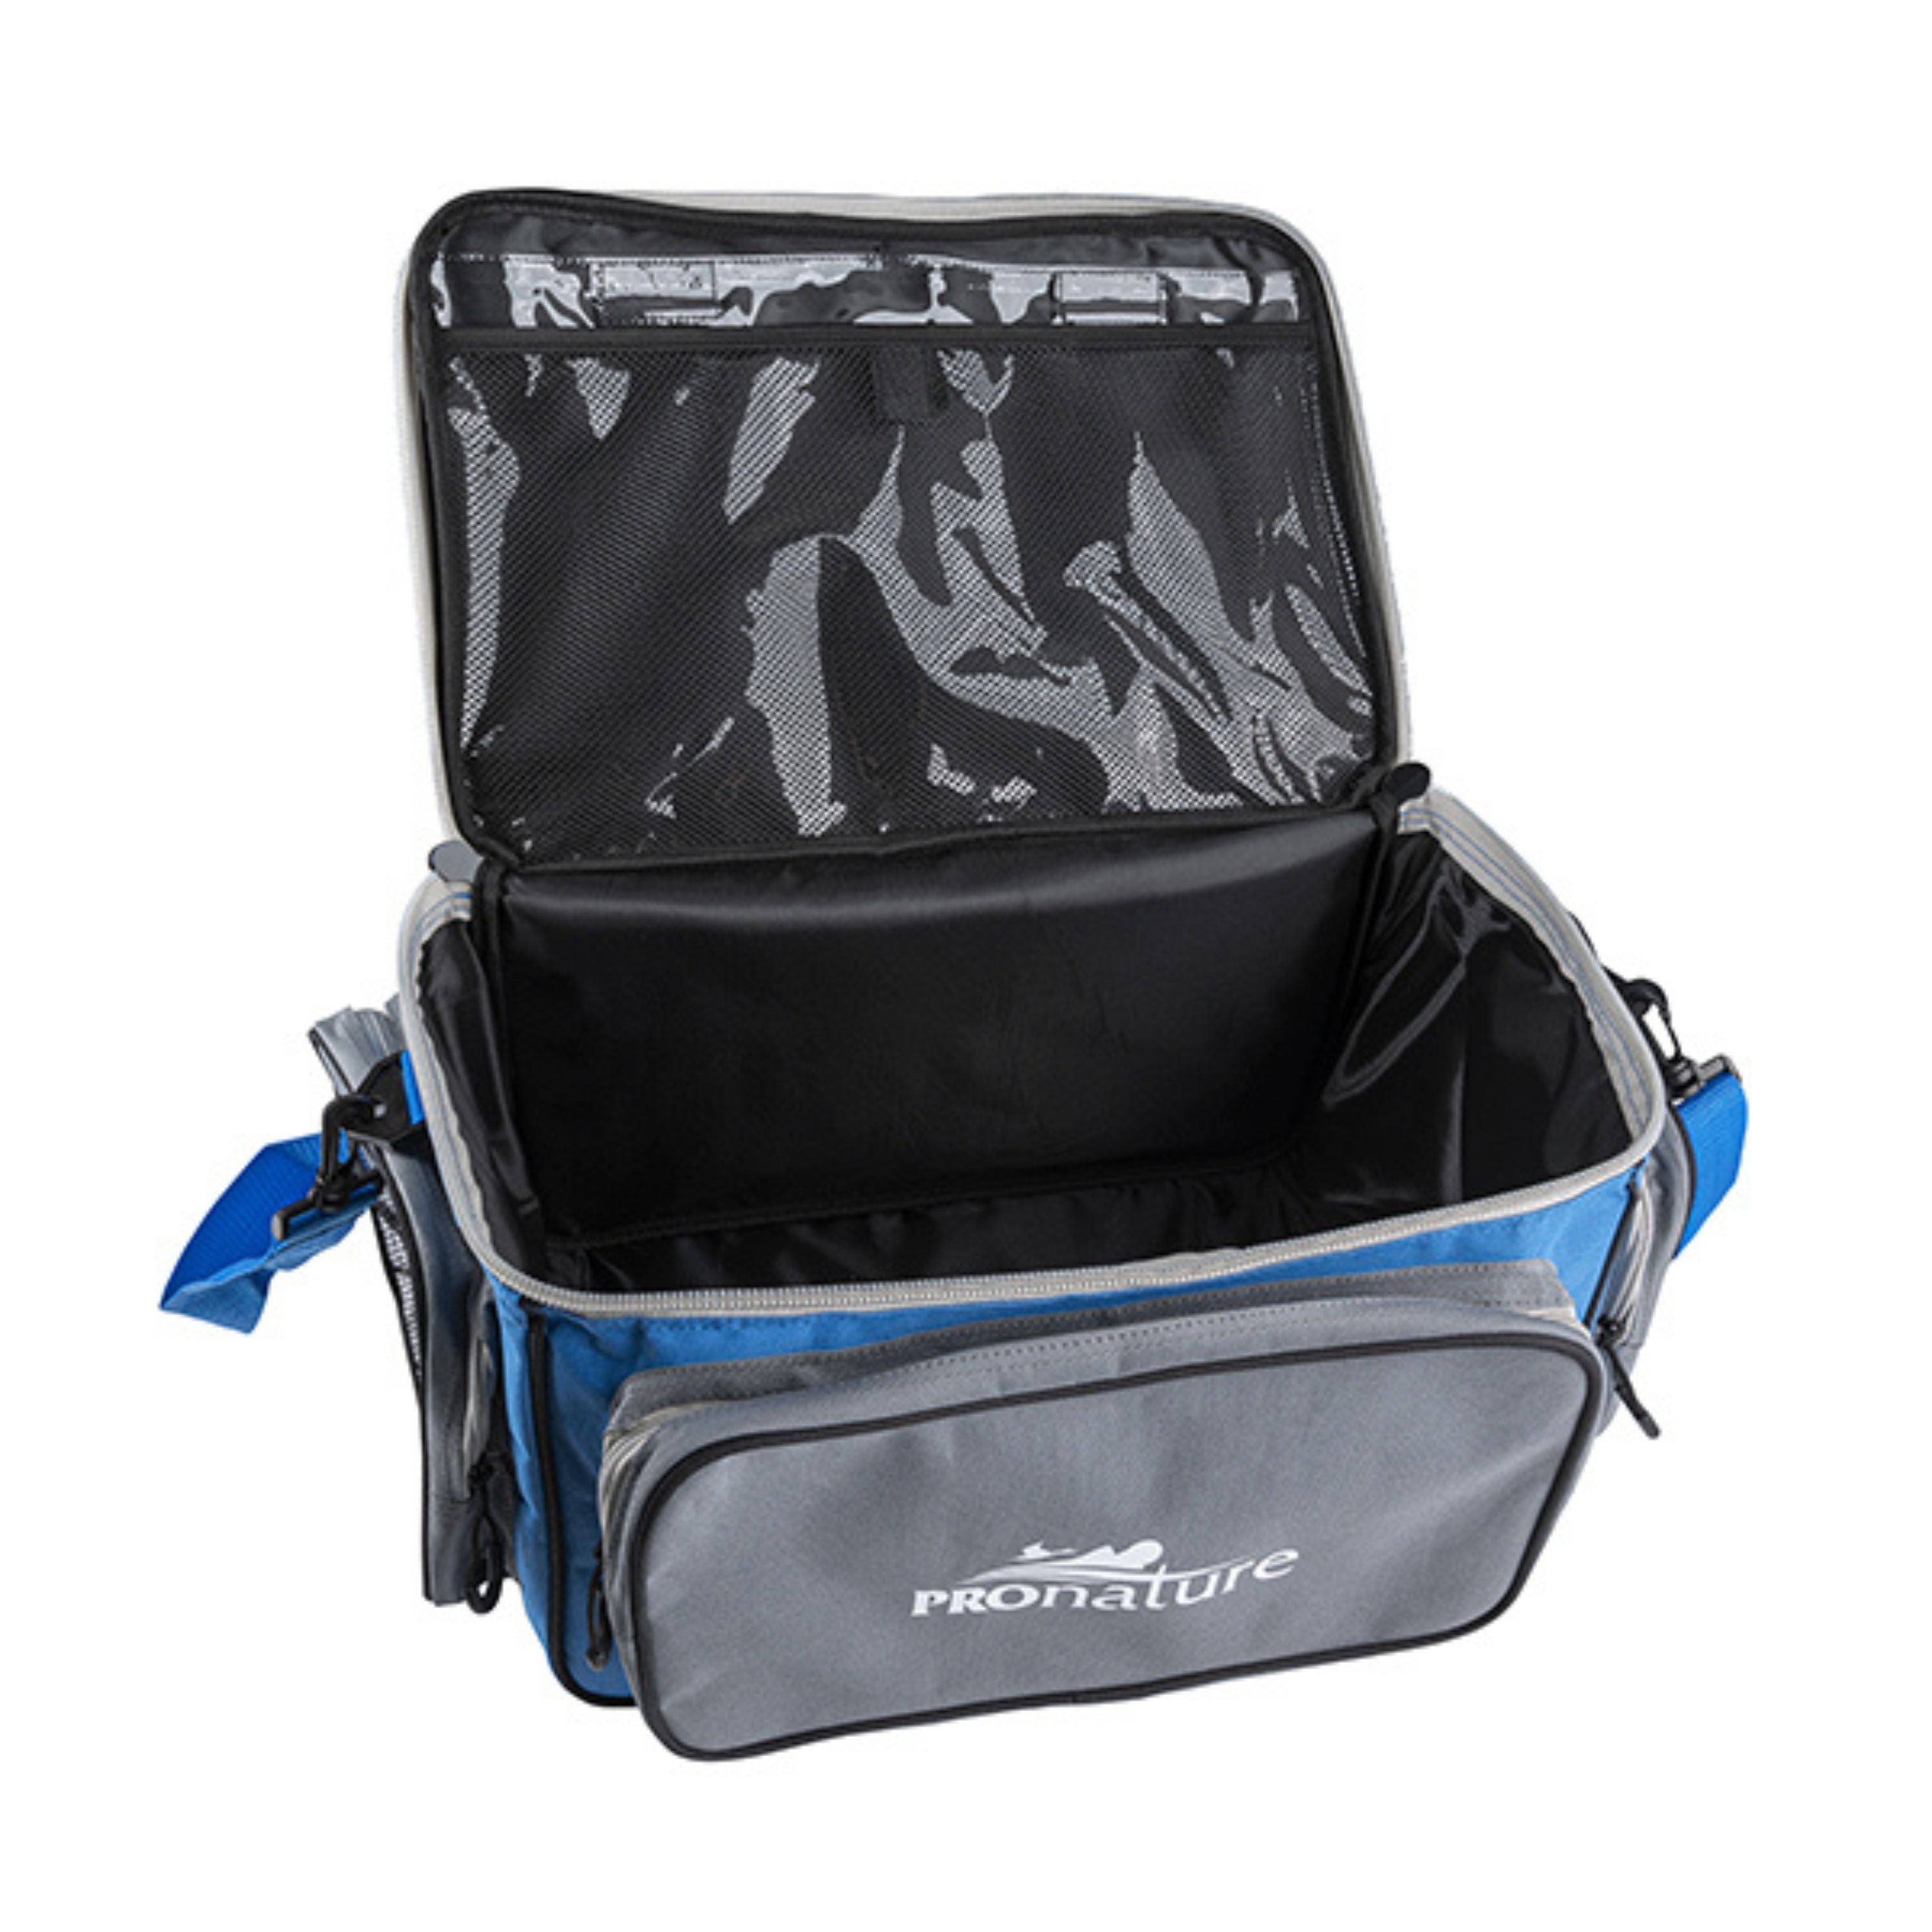 Small format fishing bag with tackle boxes — Groupe Pronature